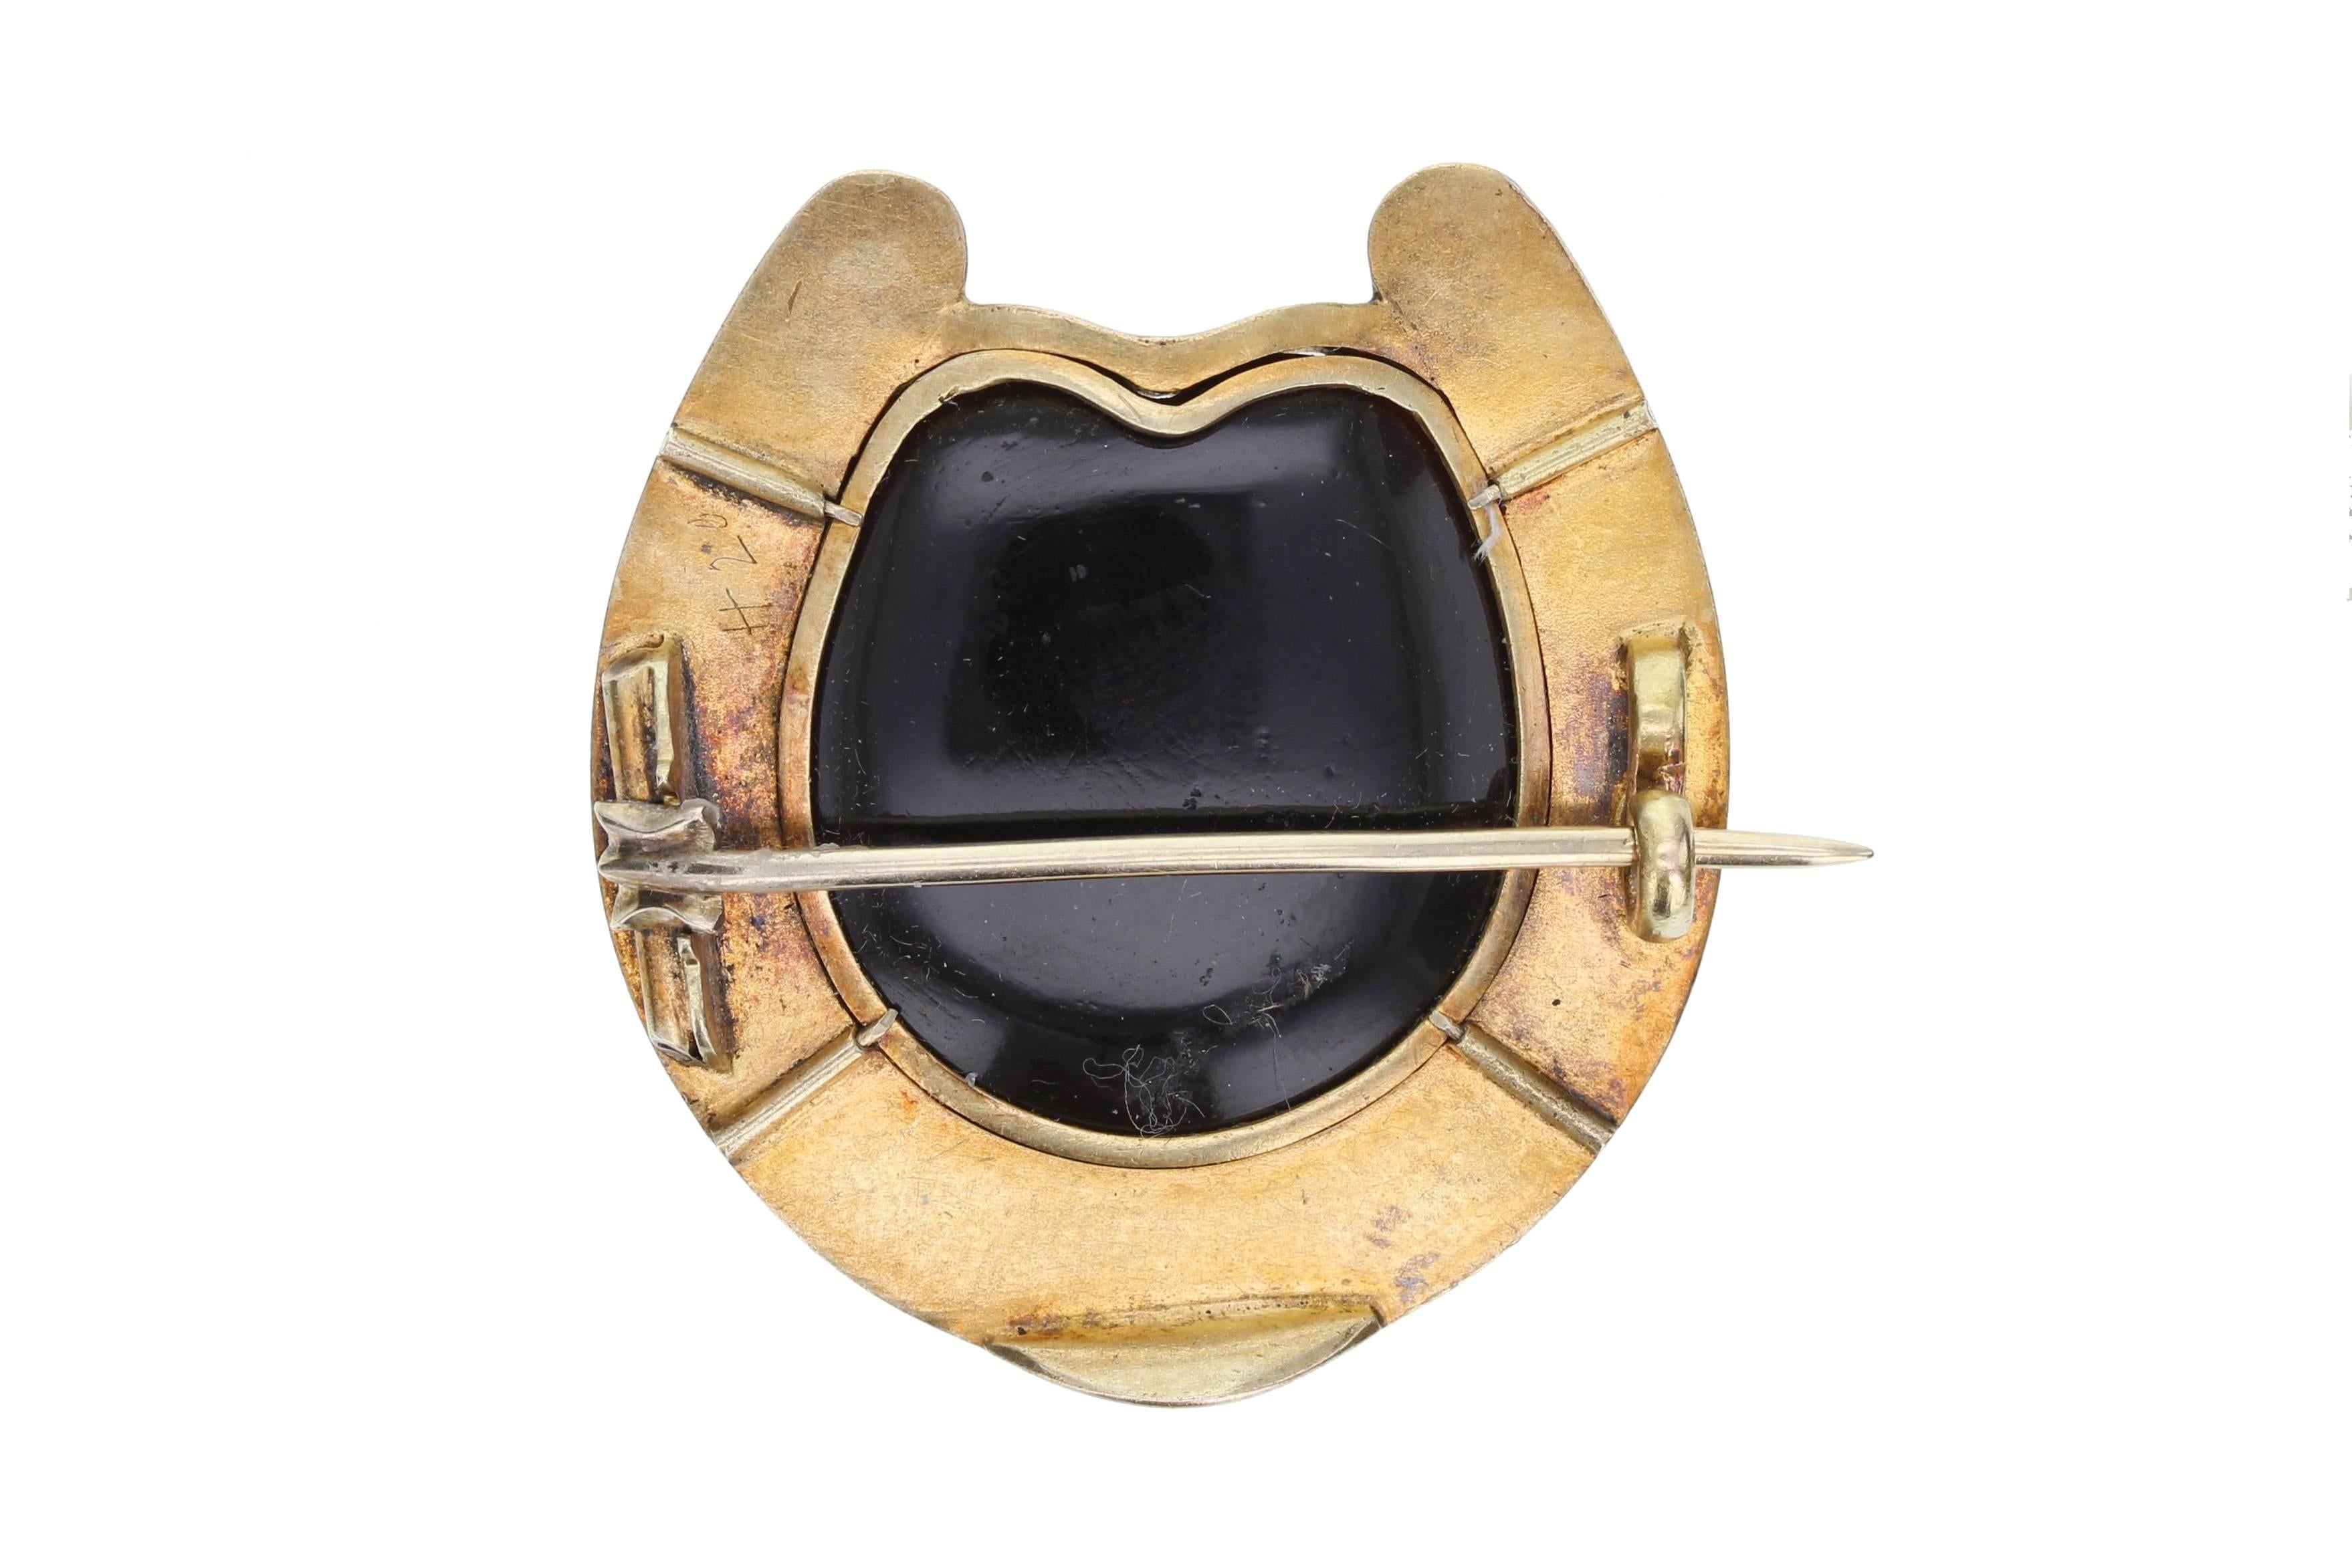 Late Victorian brooch formed from 15 carat gold with platinum 'nails' and the centre filled with agate to give the illusion of a horses hoof. Good condition. With fitted box.
 
Setting
Tests as 15ct gold and platinum
 
Dimensions
3cm x 3.5cm
